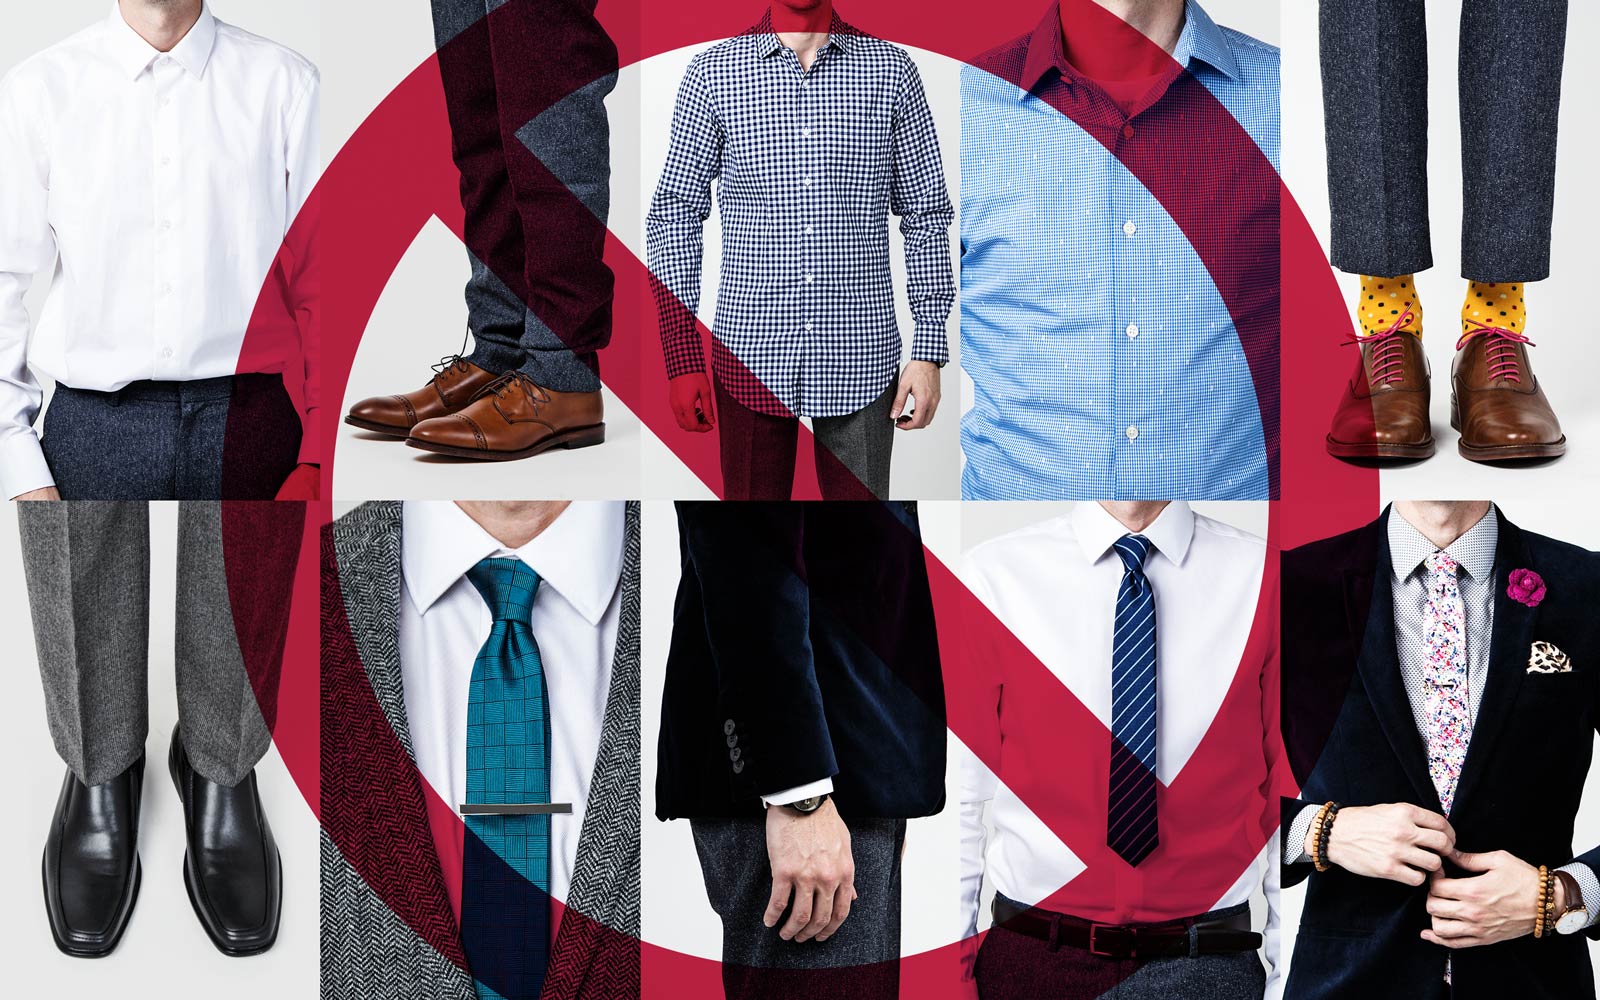 Men's Formal Wear 101 - Style Tips You Shouldn't Miss